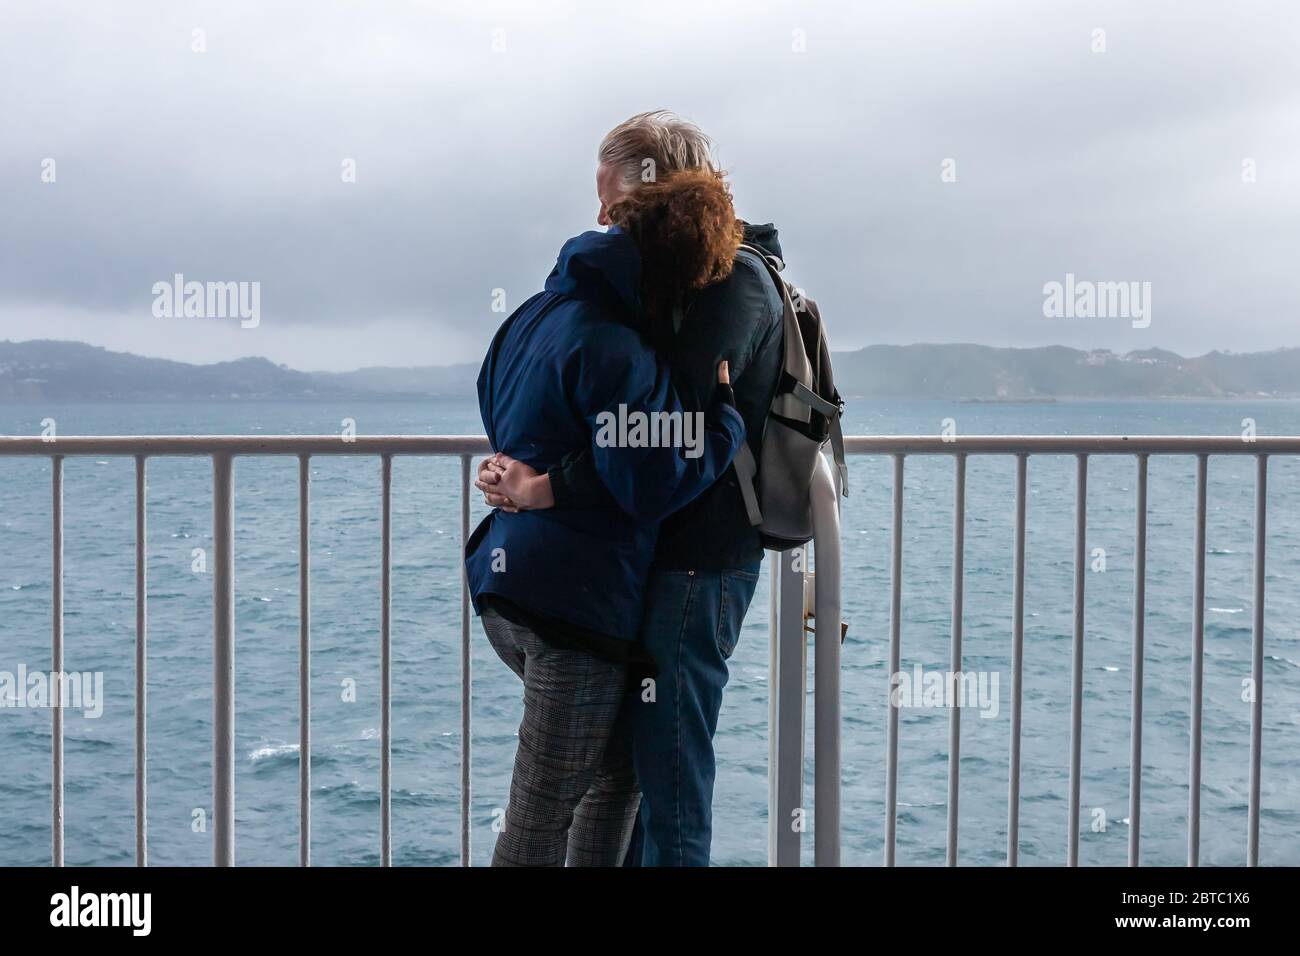 Two people embrace on the interislander ferry from Wellington to Picton, New Zealand, February 2020 Stock Photo